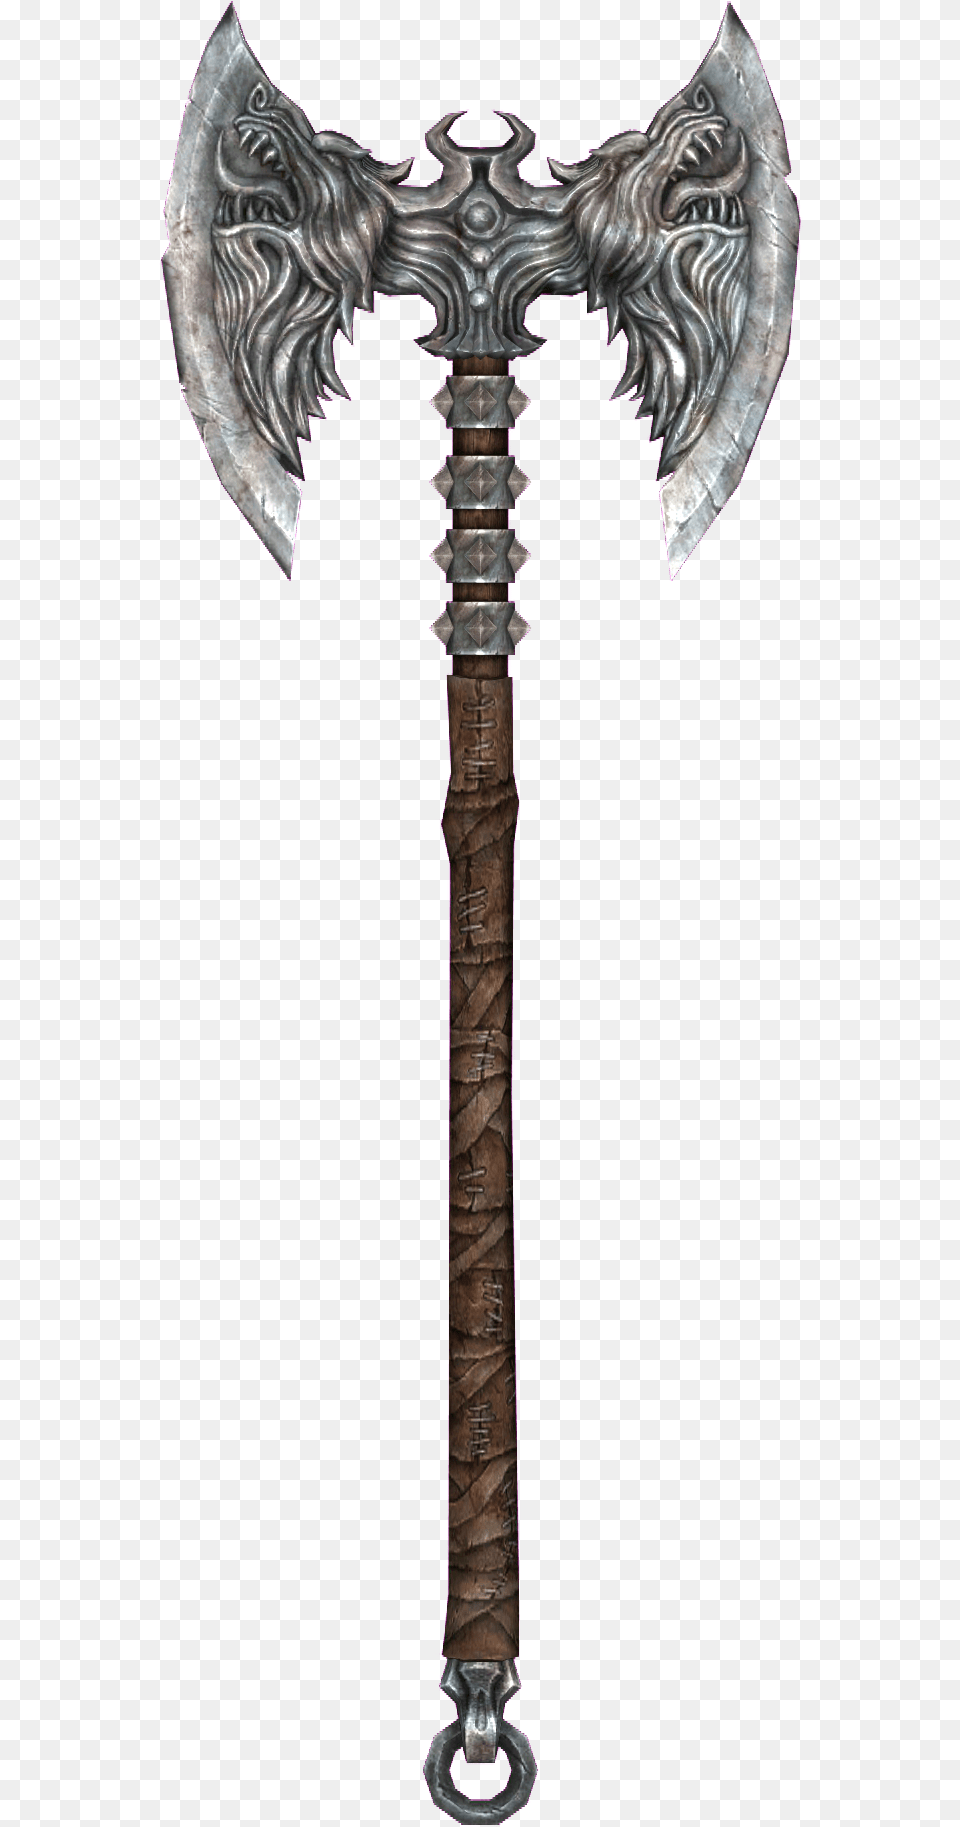 Http Images3 Wikia Nocookie Net Ruefulaxe Skyrim Silver Battle Axe, Weapon, Device, Tool, Blade Free Transparent Png